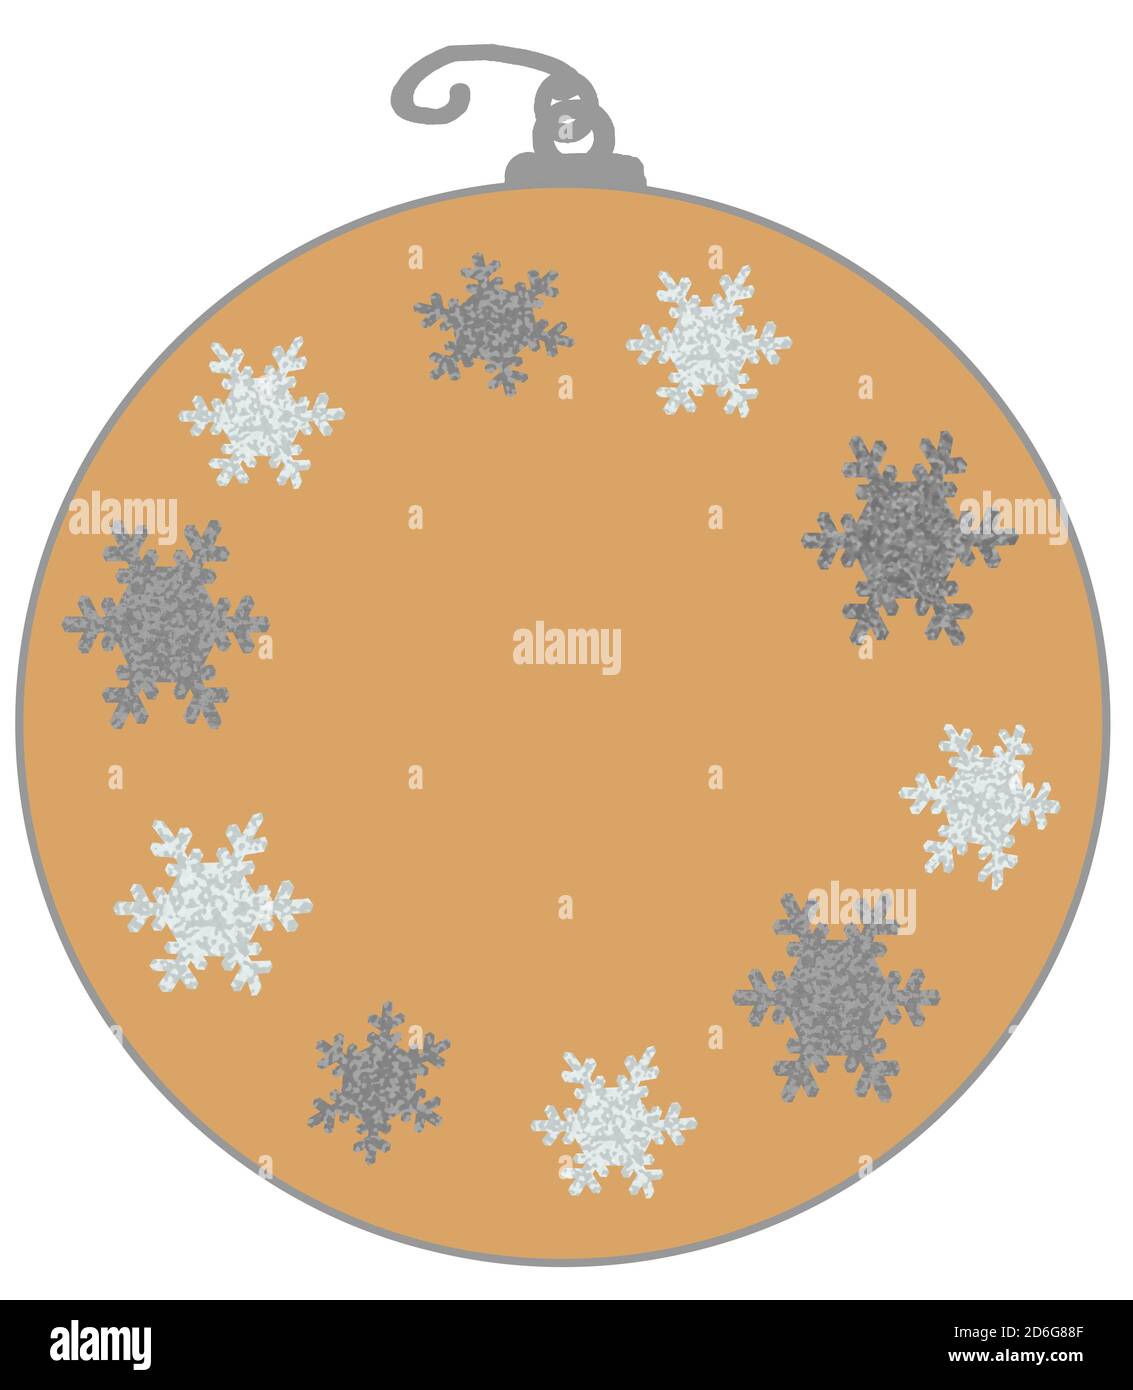 Silver and gold Christmas ornament hand drawn style with snowflakes illustration design resource. Stock Photo